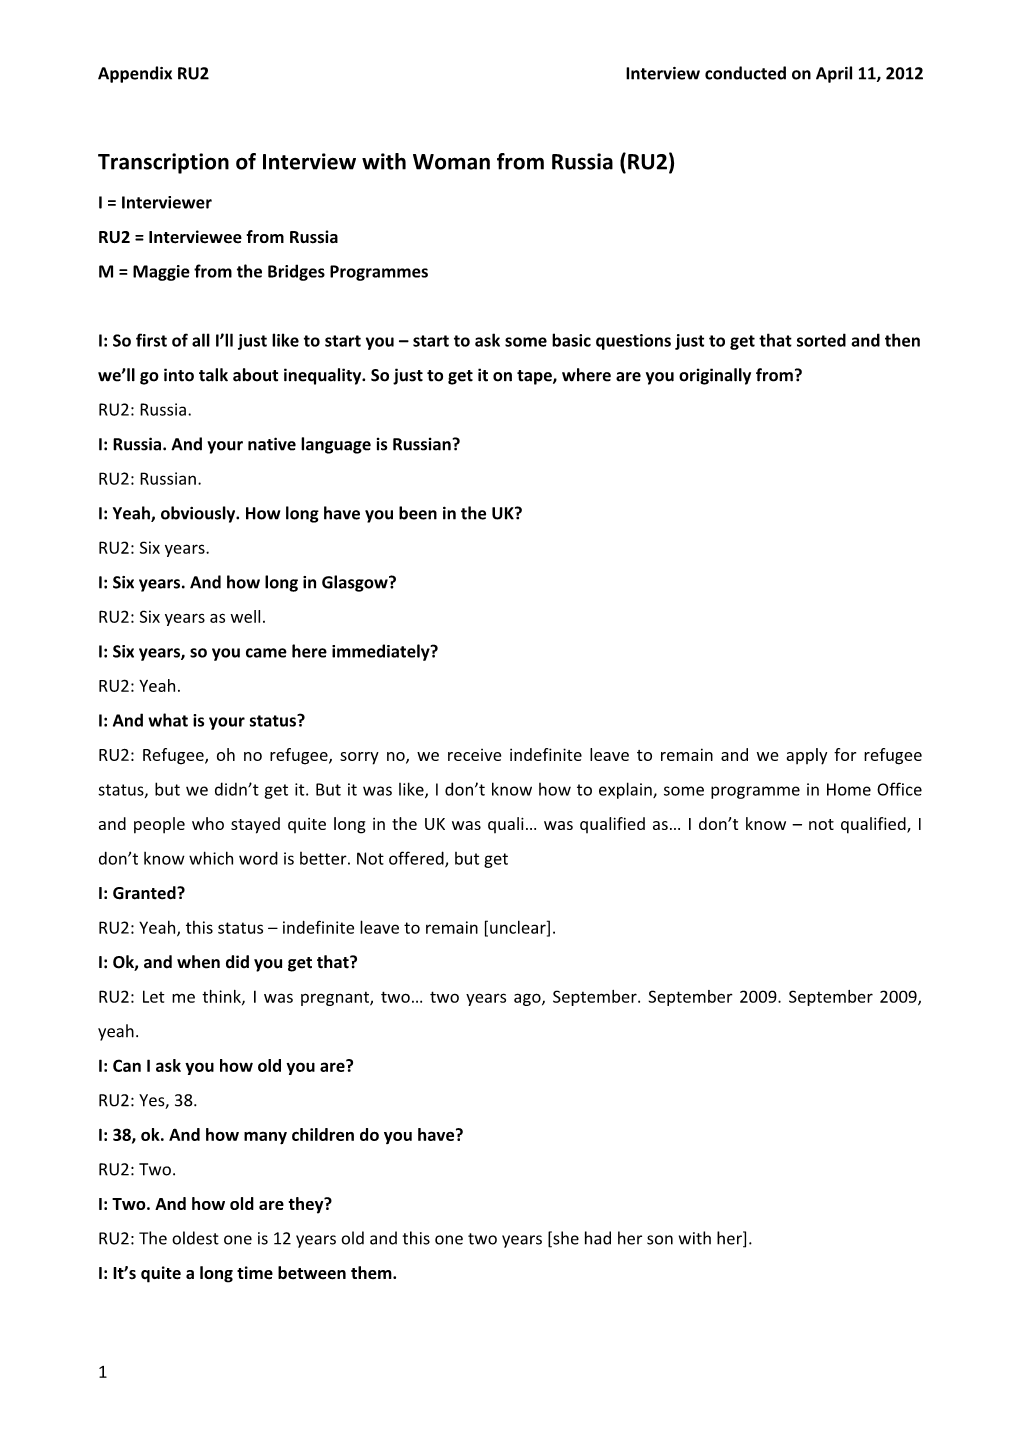 Transcription of Interview with Woman from Russia (RU2)